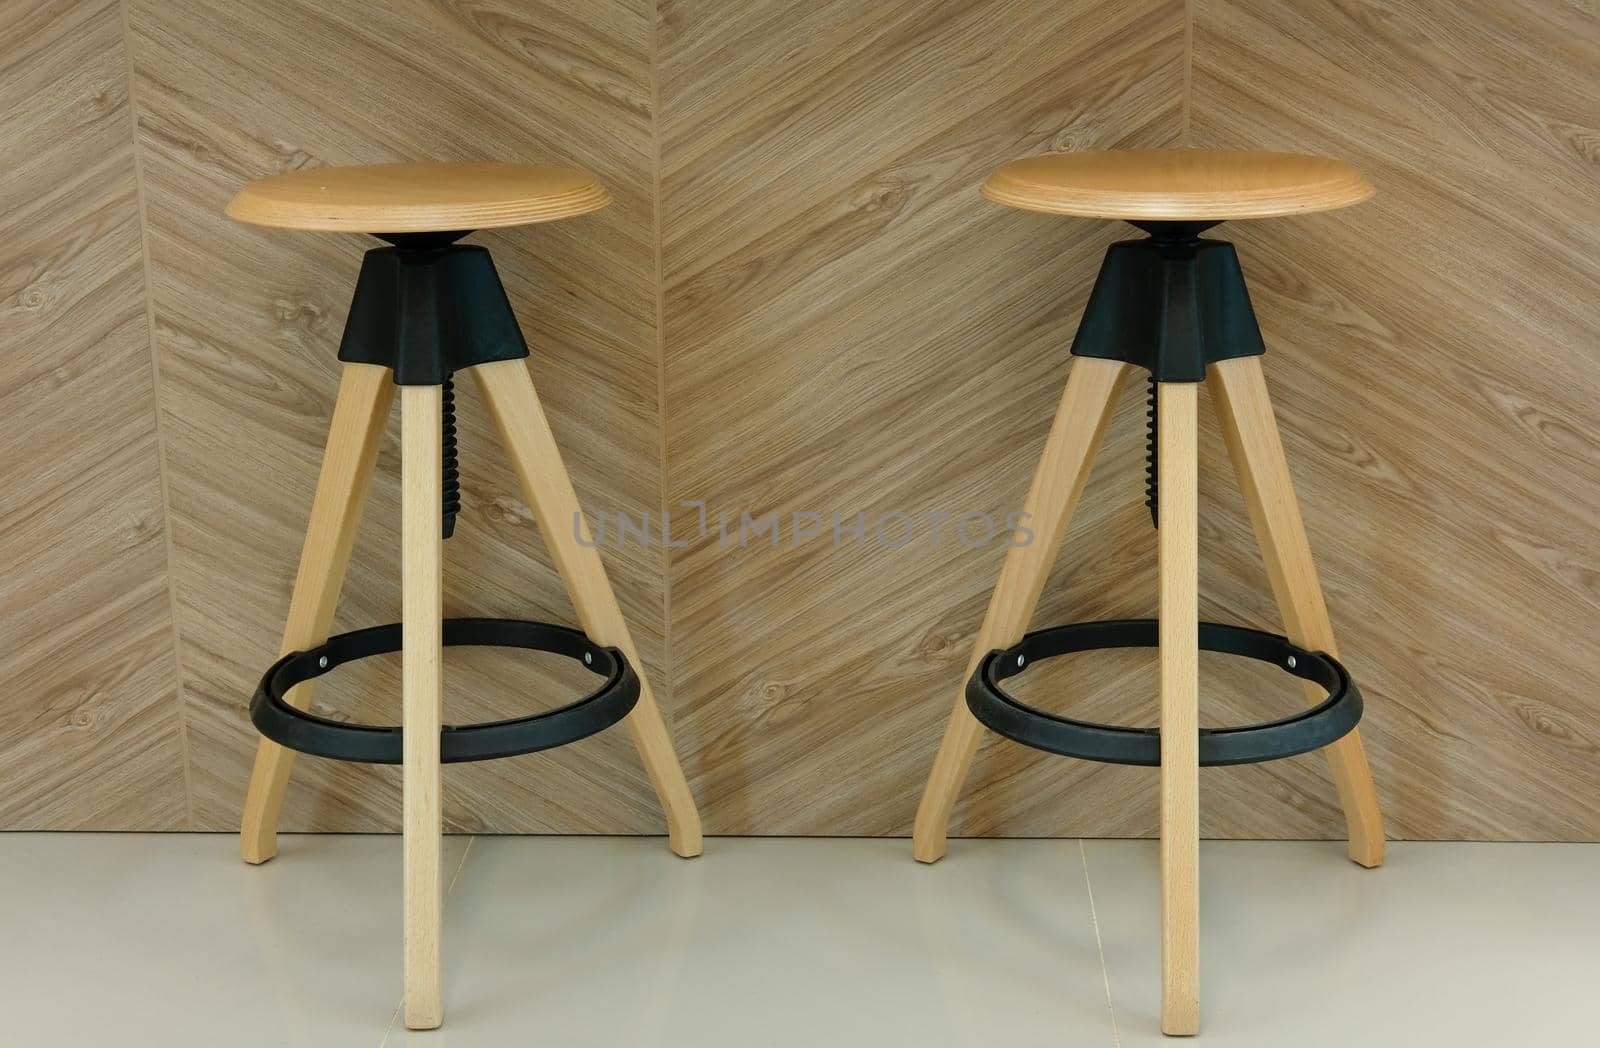 stool chair in cafe coffee shop cafeteria restaurant food center interior by pp99